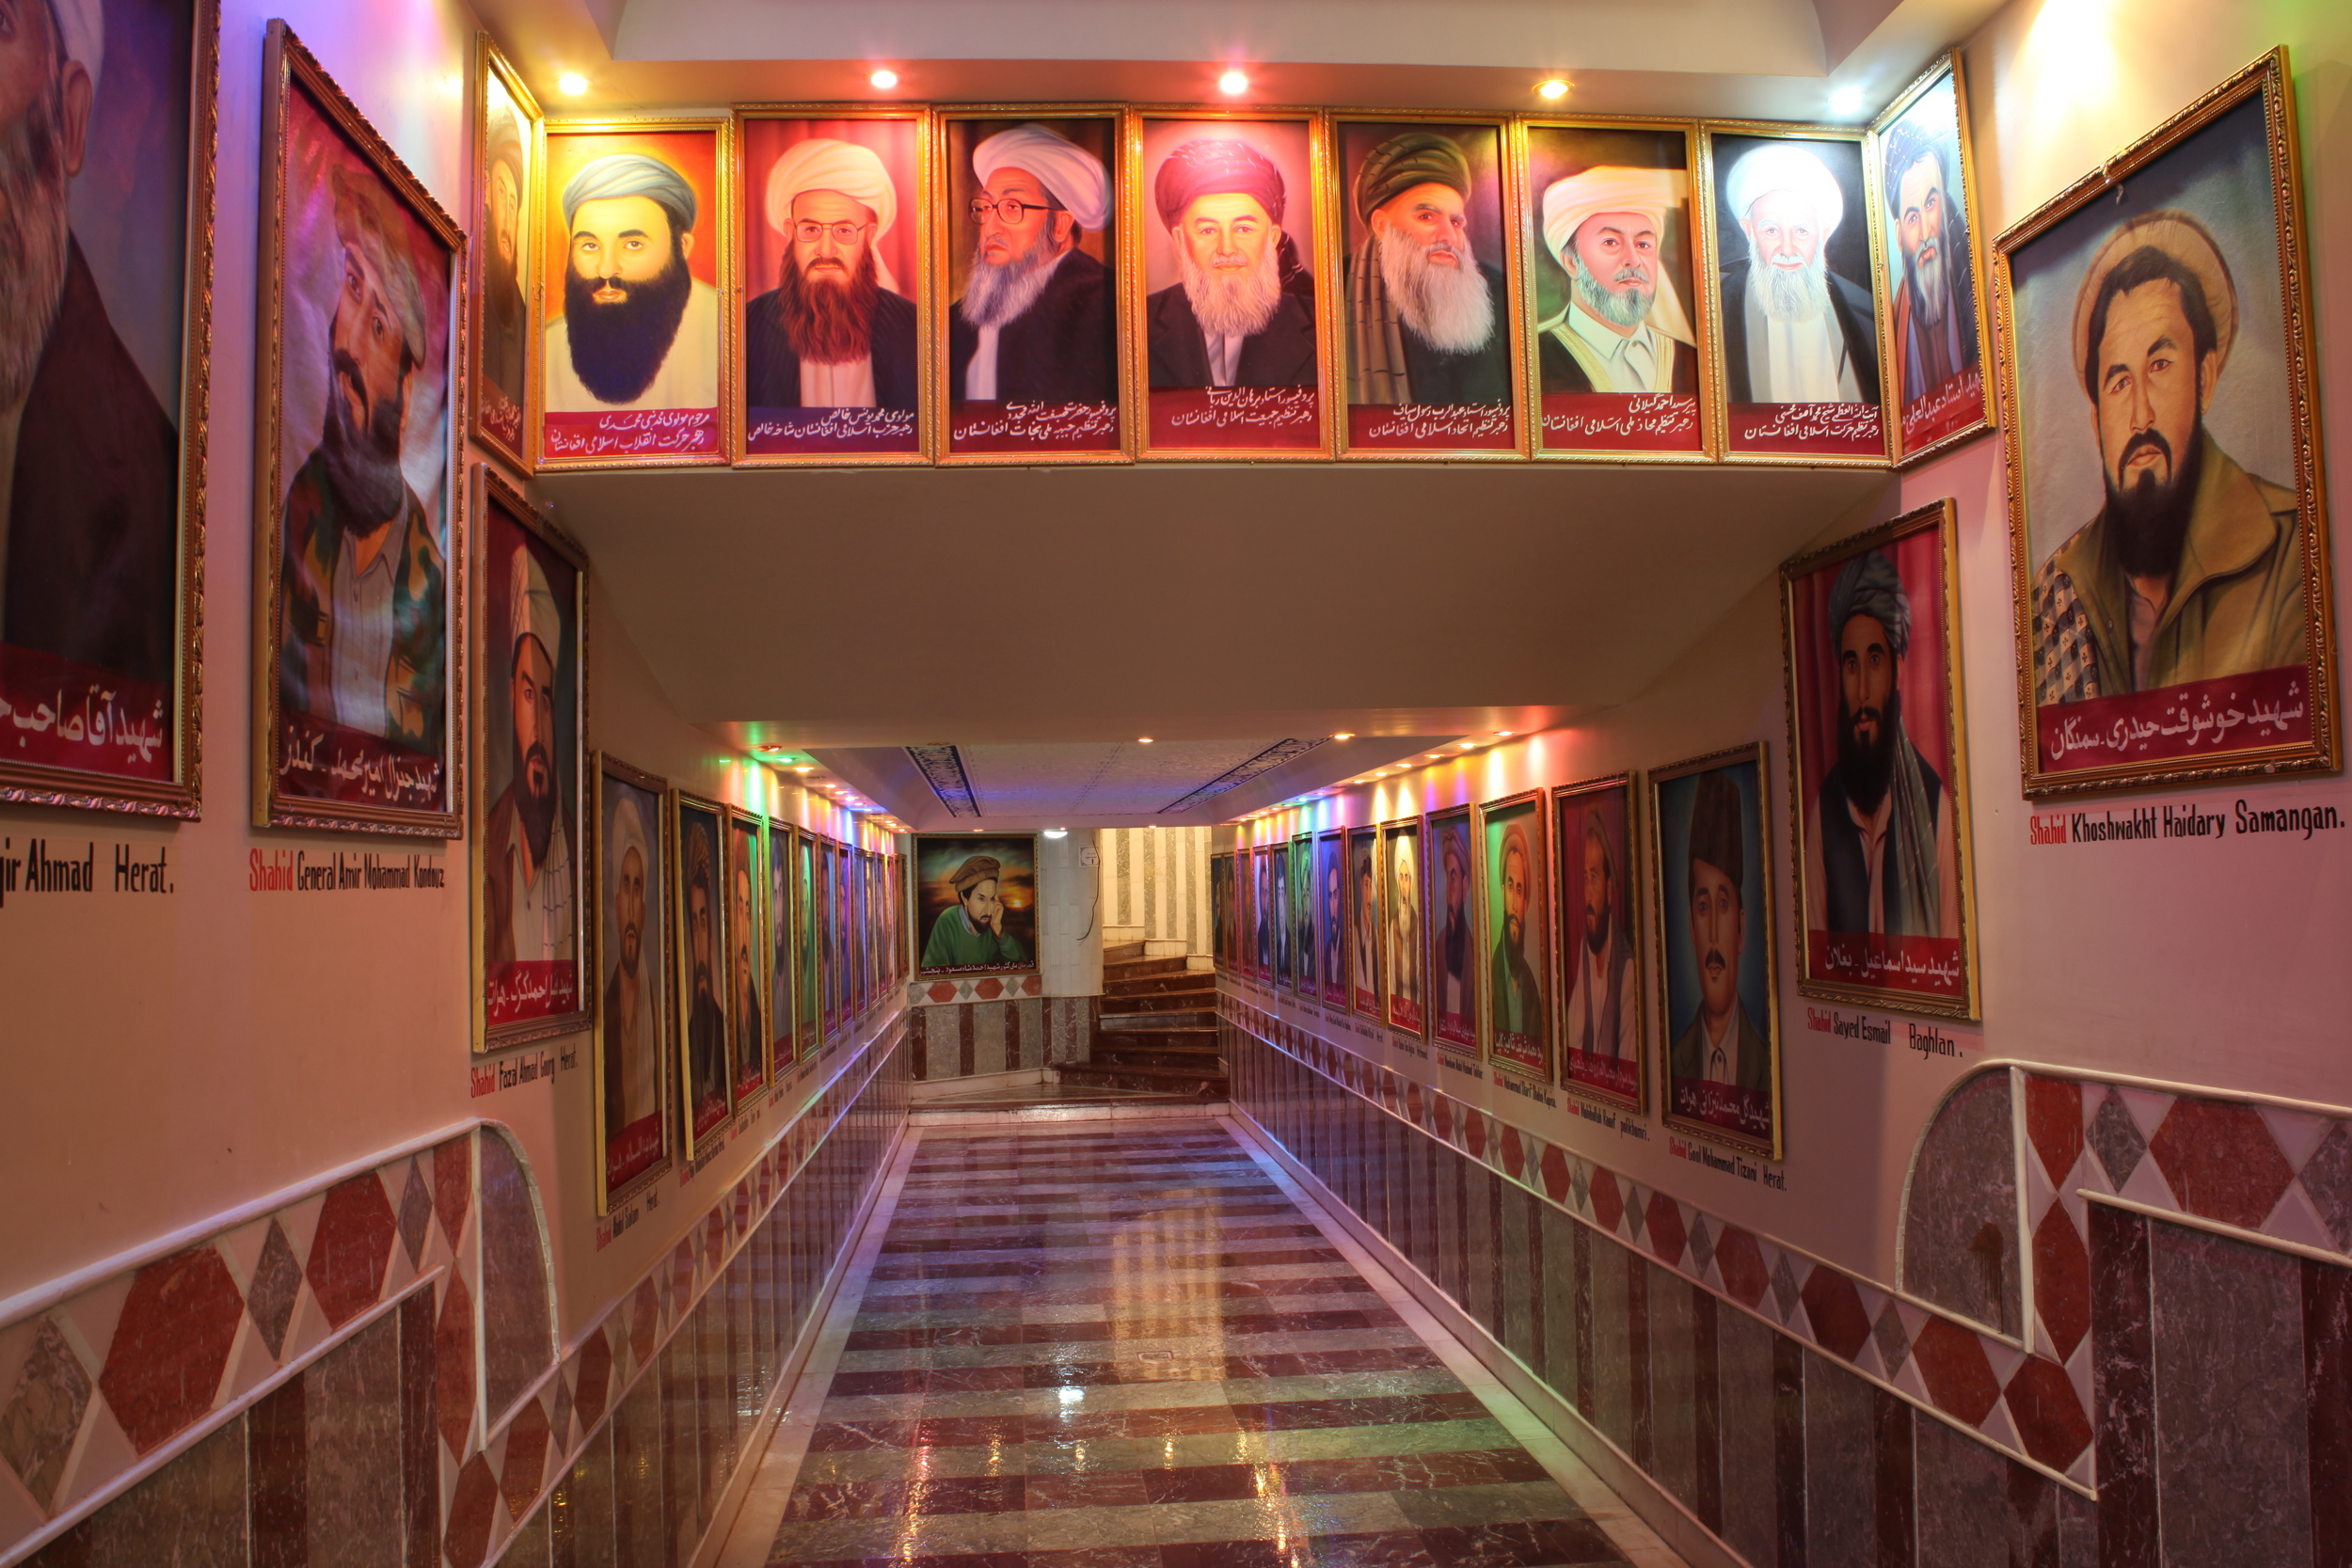   The Jihad Museum is a private museum in the capital city of Herat province. Built by a tribal leader of Herat, the museum grounds are home to a display of military weaponry ranging from the British through the Soviet occupations of Afghanistan. The